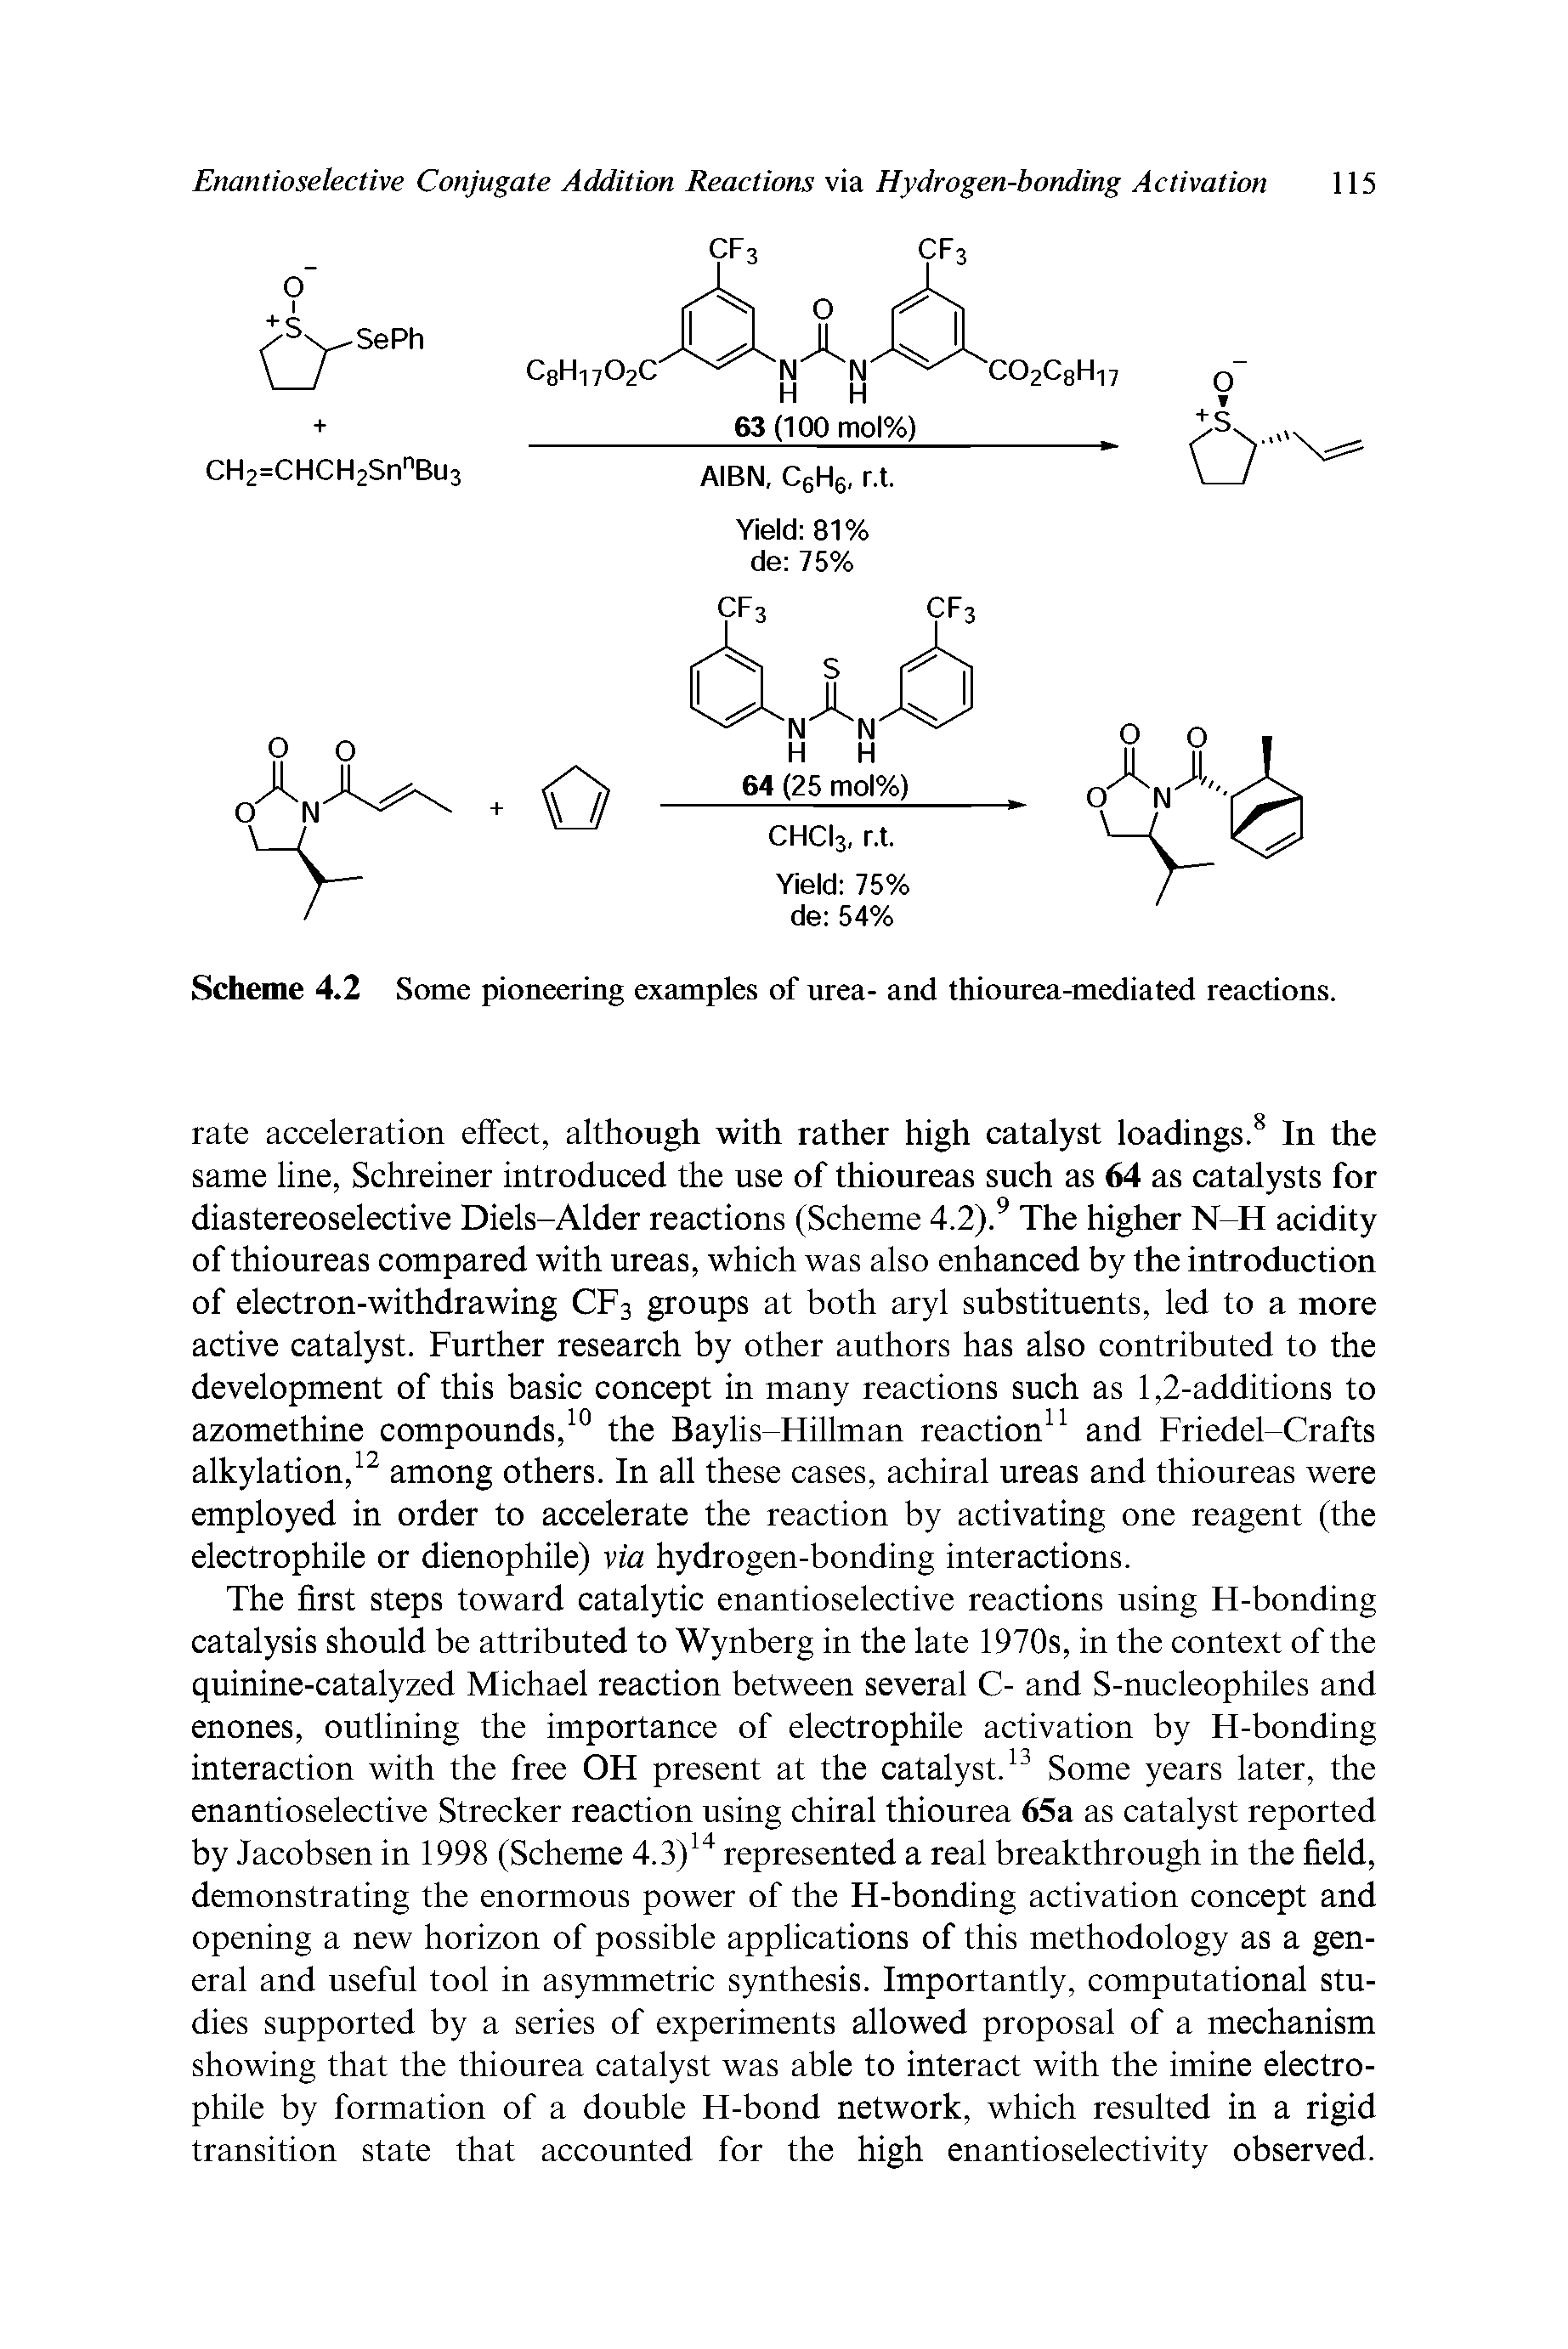 Scheme 4.2 Some pioneering examples of urea- and thiourea-mediated reactions.